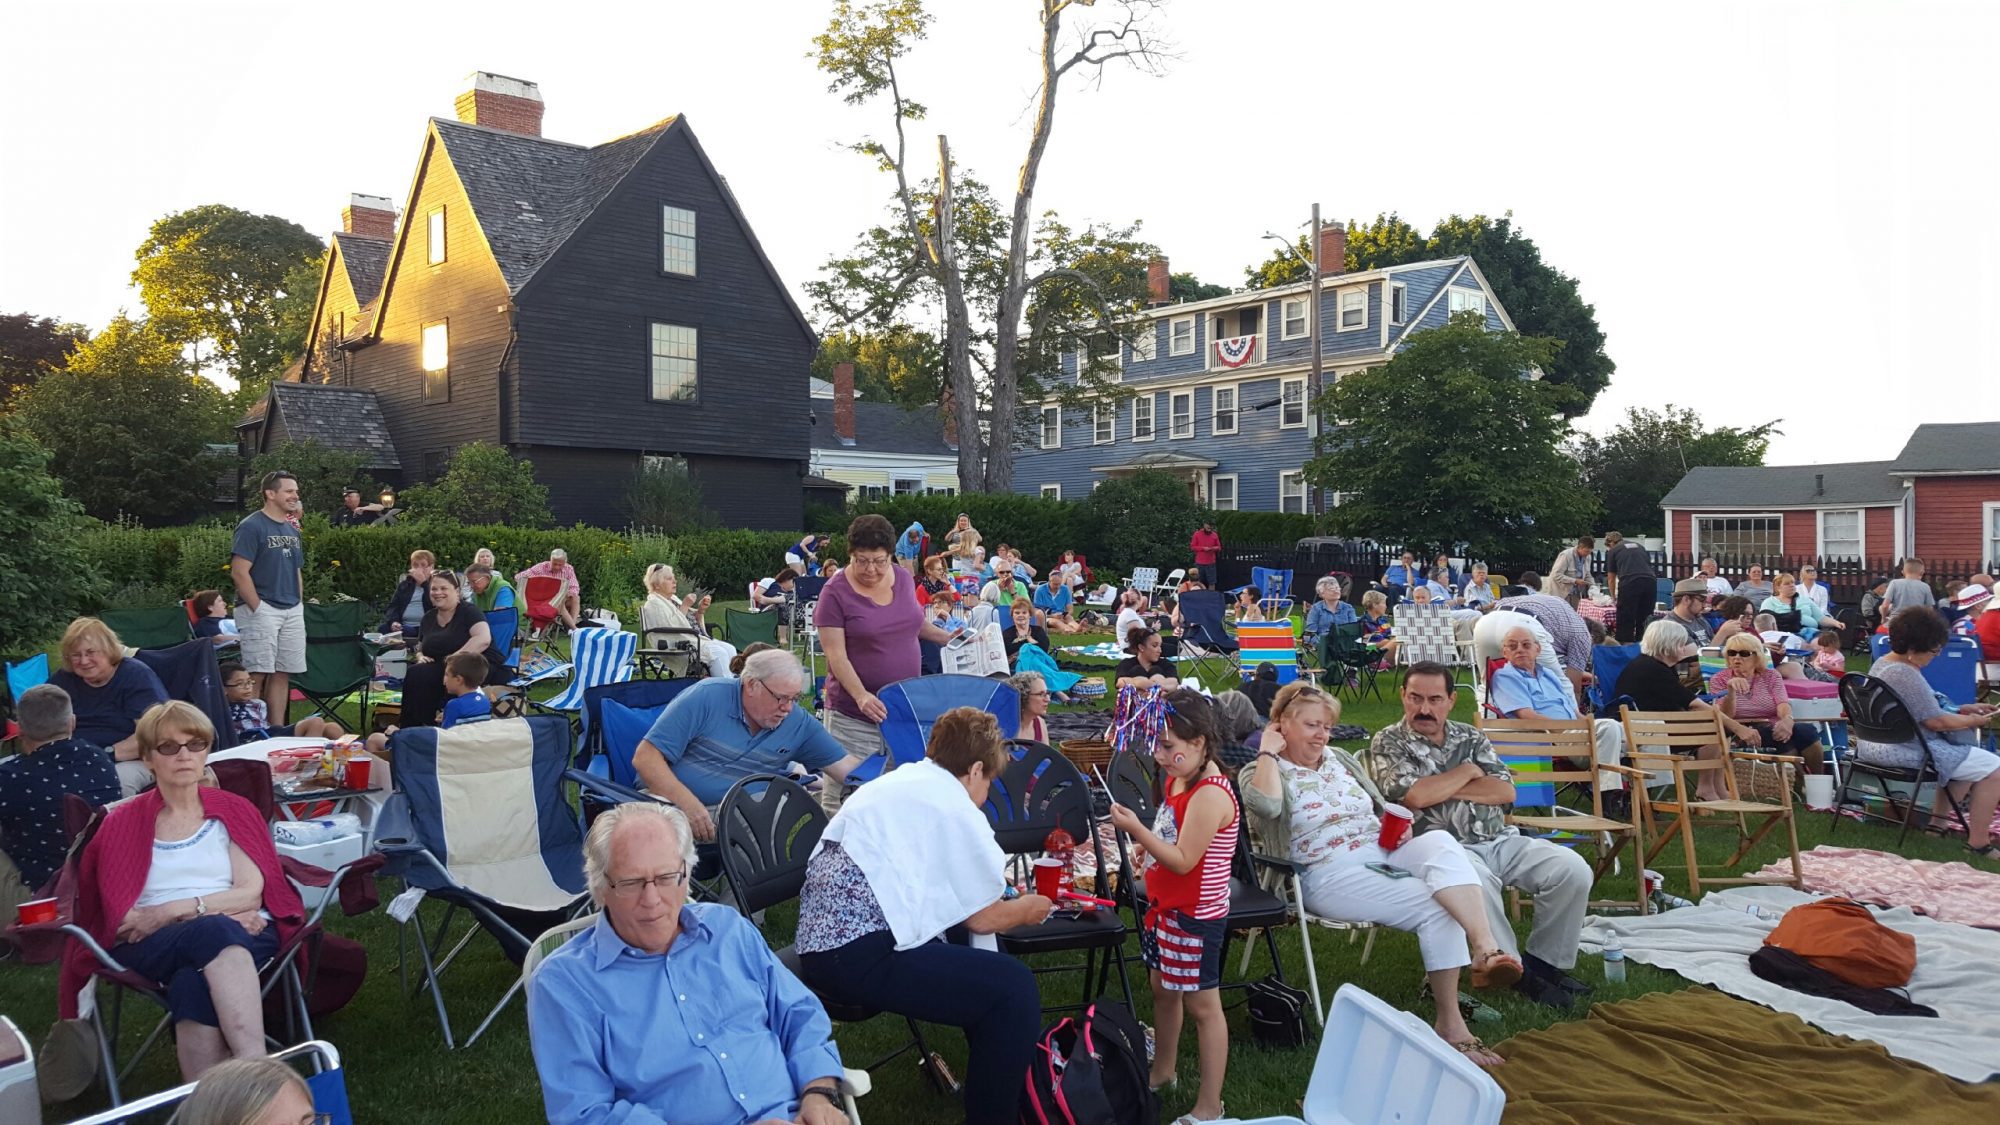 The seaside lawn at The House of the Seven Gables is full of people ready to celebrate the Fourth of July